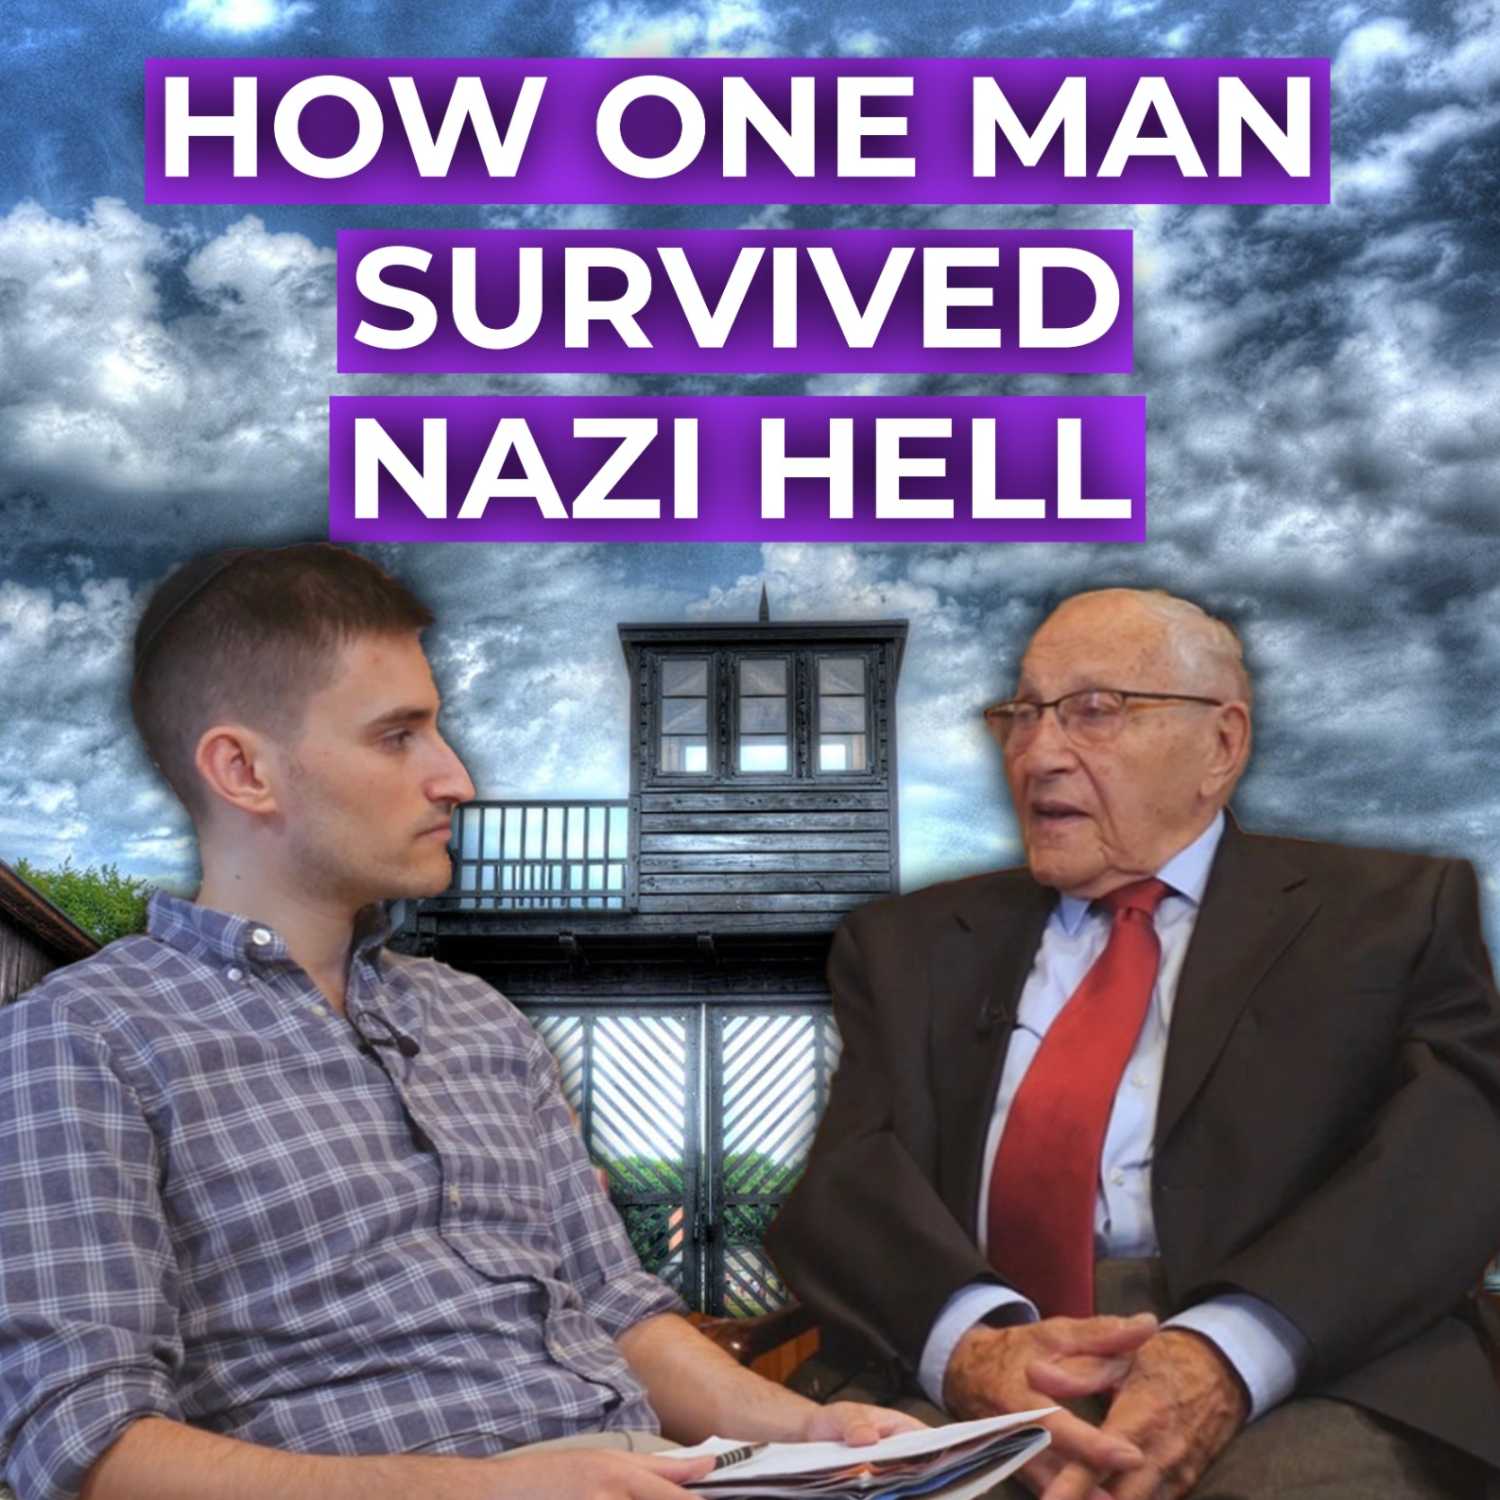 How One Man Survived Nazi Hell - Hangings, Shootings, Starvation, Terror